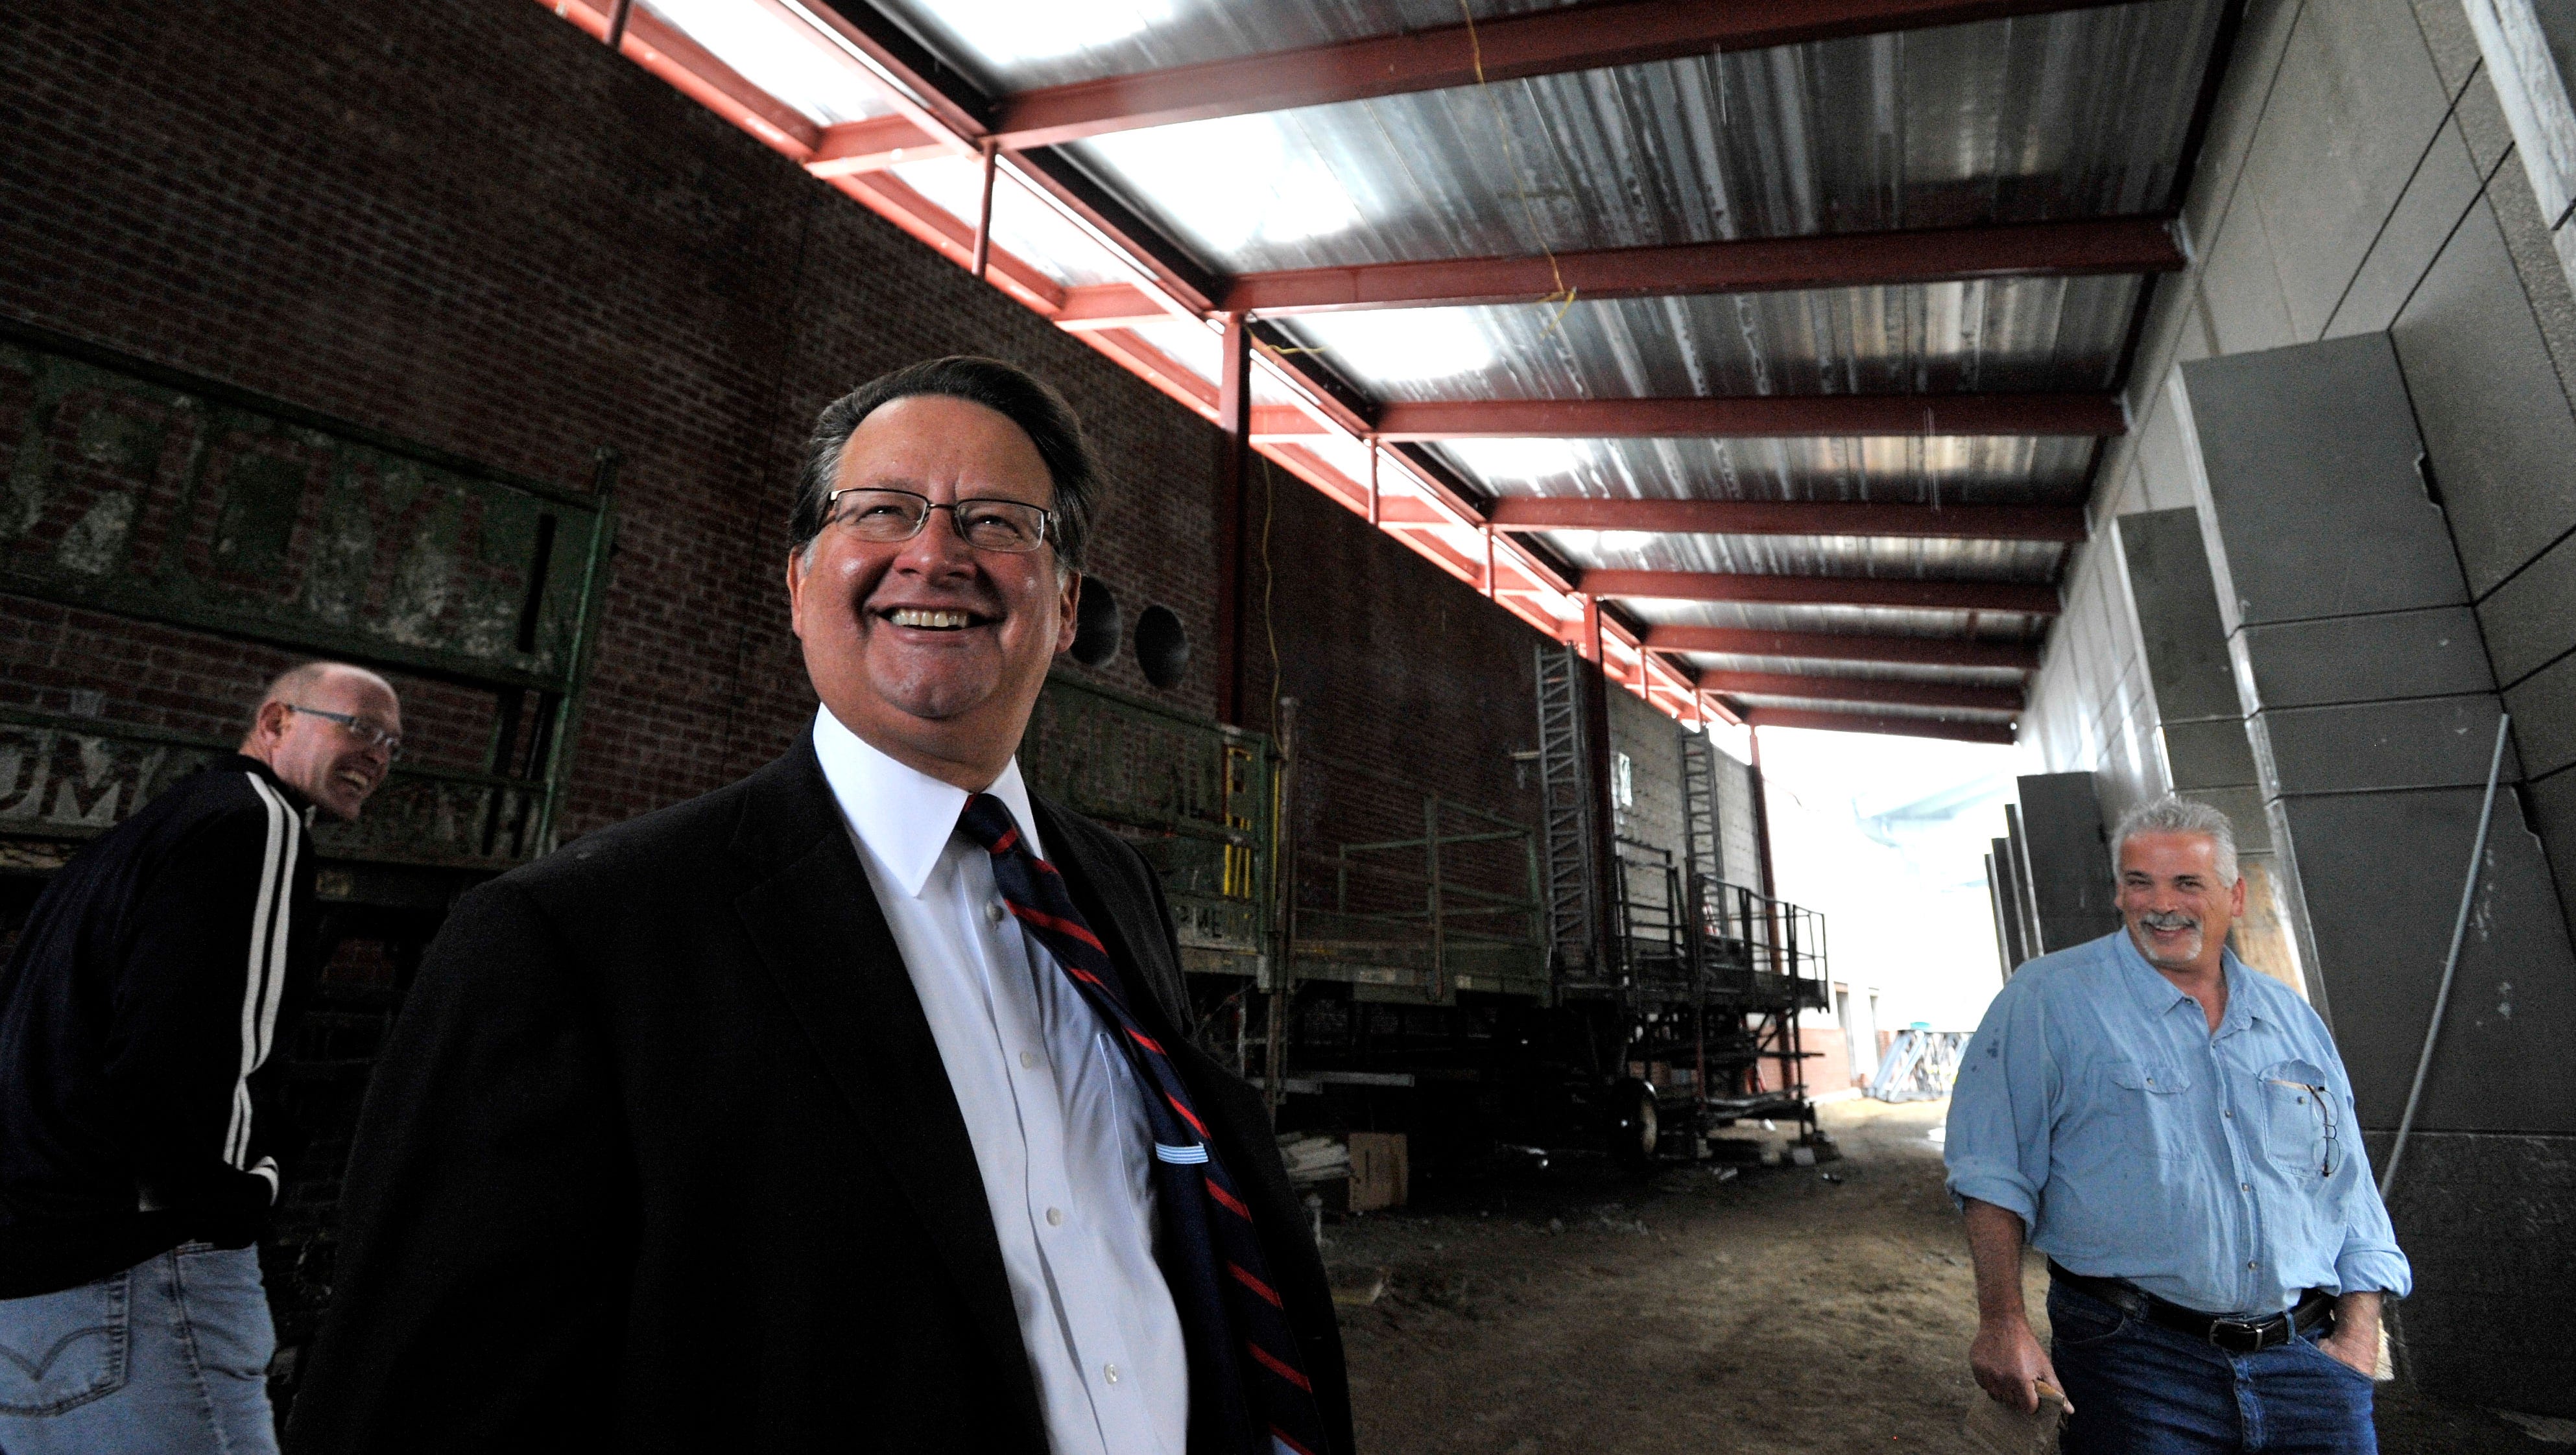 U.S. Congressman Gary Peters, center, shares a laugh with St. Clair County Board Chairman Jeff Bohm, left, and Orion Construction project manager Ed Simeone, right, of Clarkston, as they stand in the "pre-function area" of the convention center.